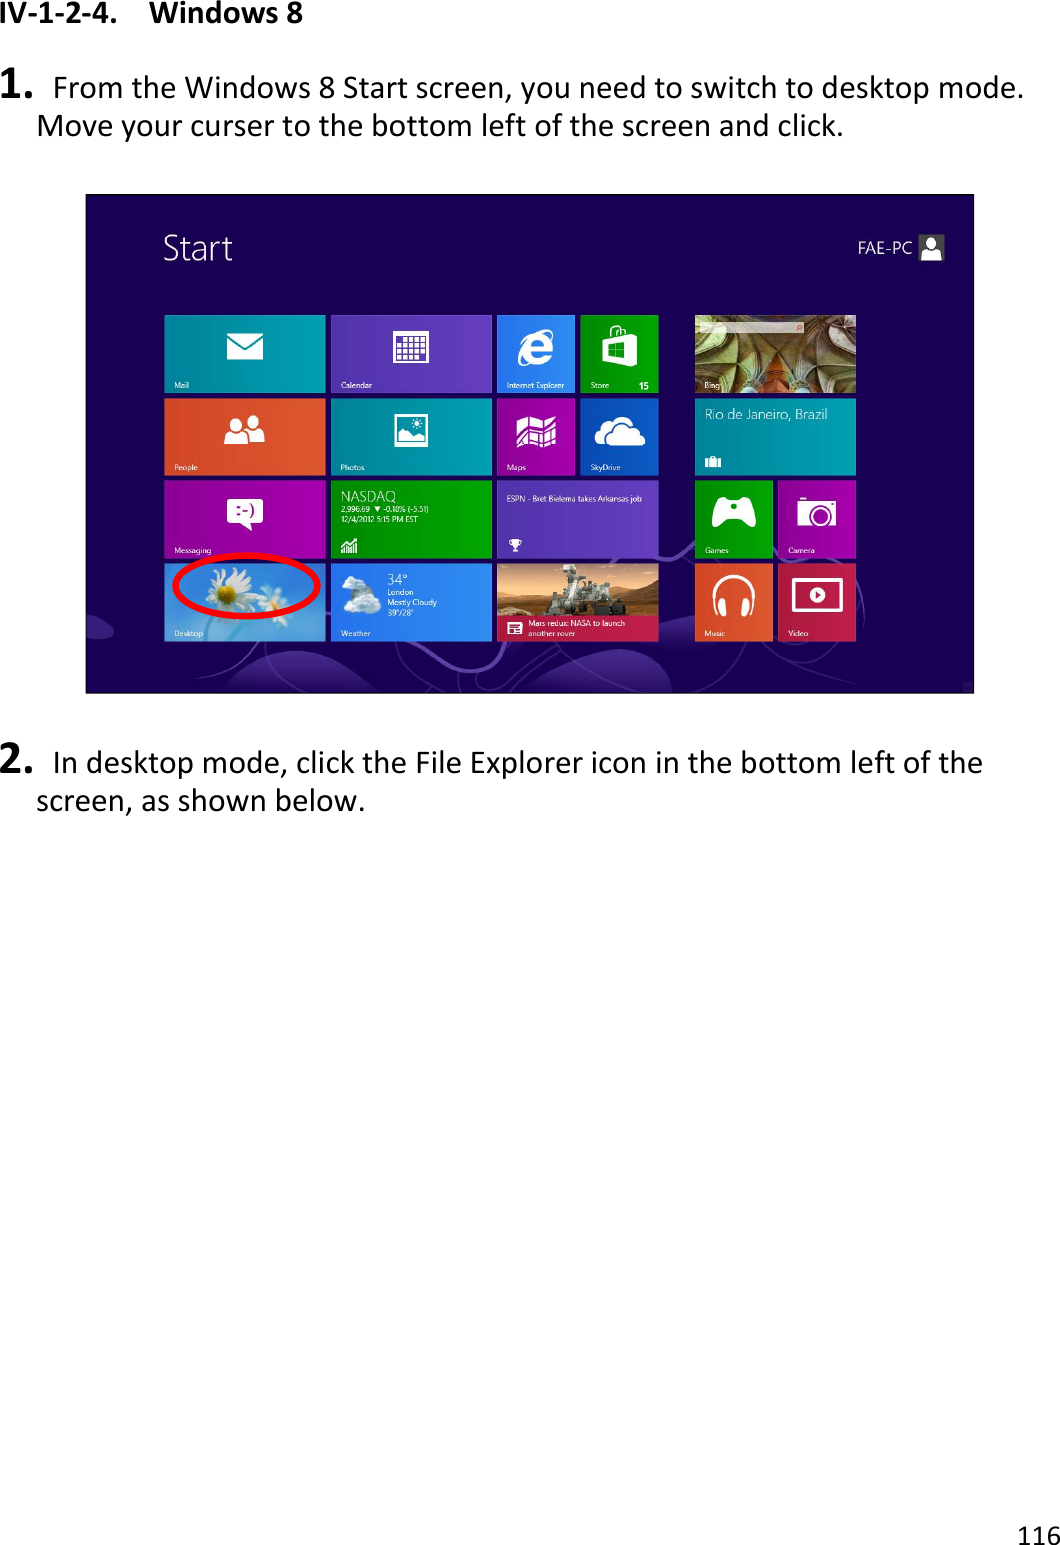 116  IV-1-2-4.  Windows 8  1.   From the Windows 8 Start screen, you need to switch to desktop mode. Move your curser to the bottom left of the screen and click.    2.   In desktop mode, click the File Explorer icon in the bottom left of the screen, as shown below.  